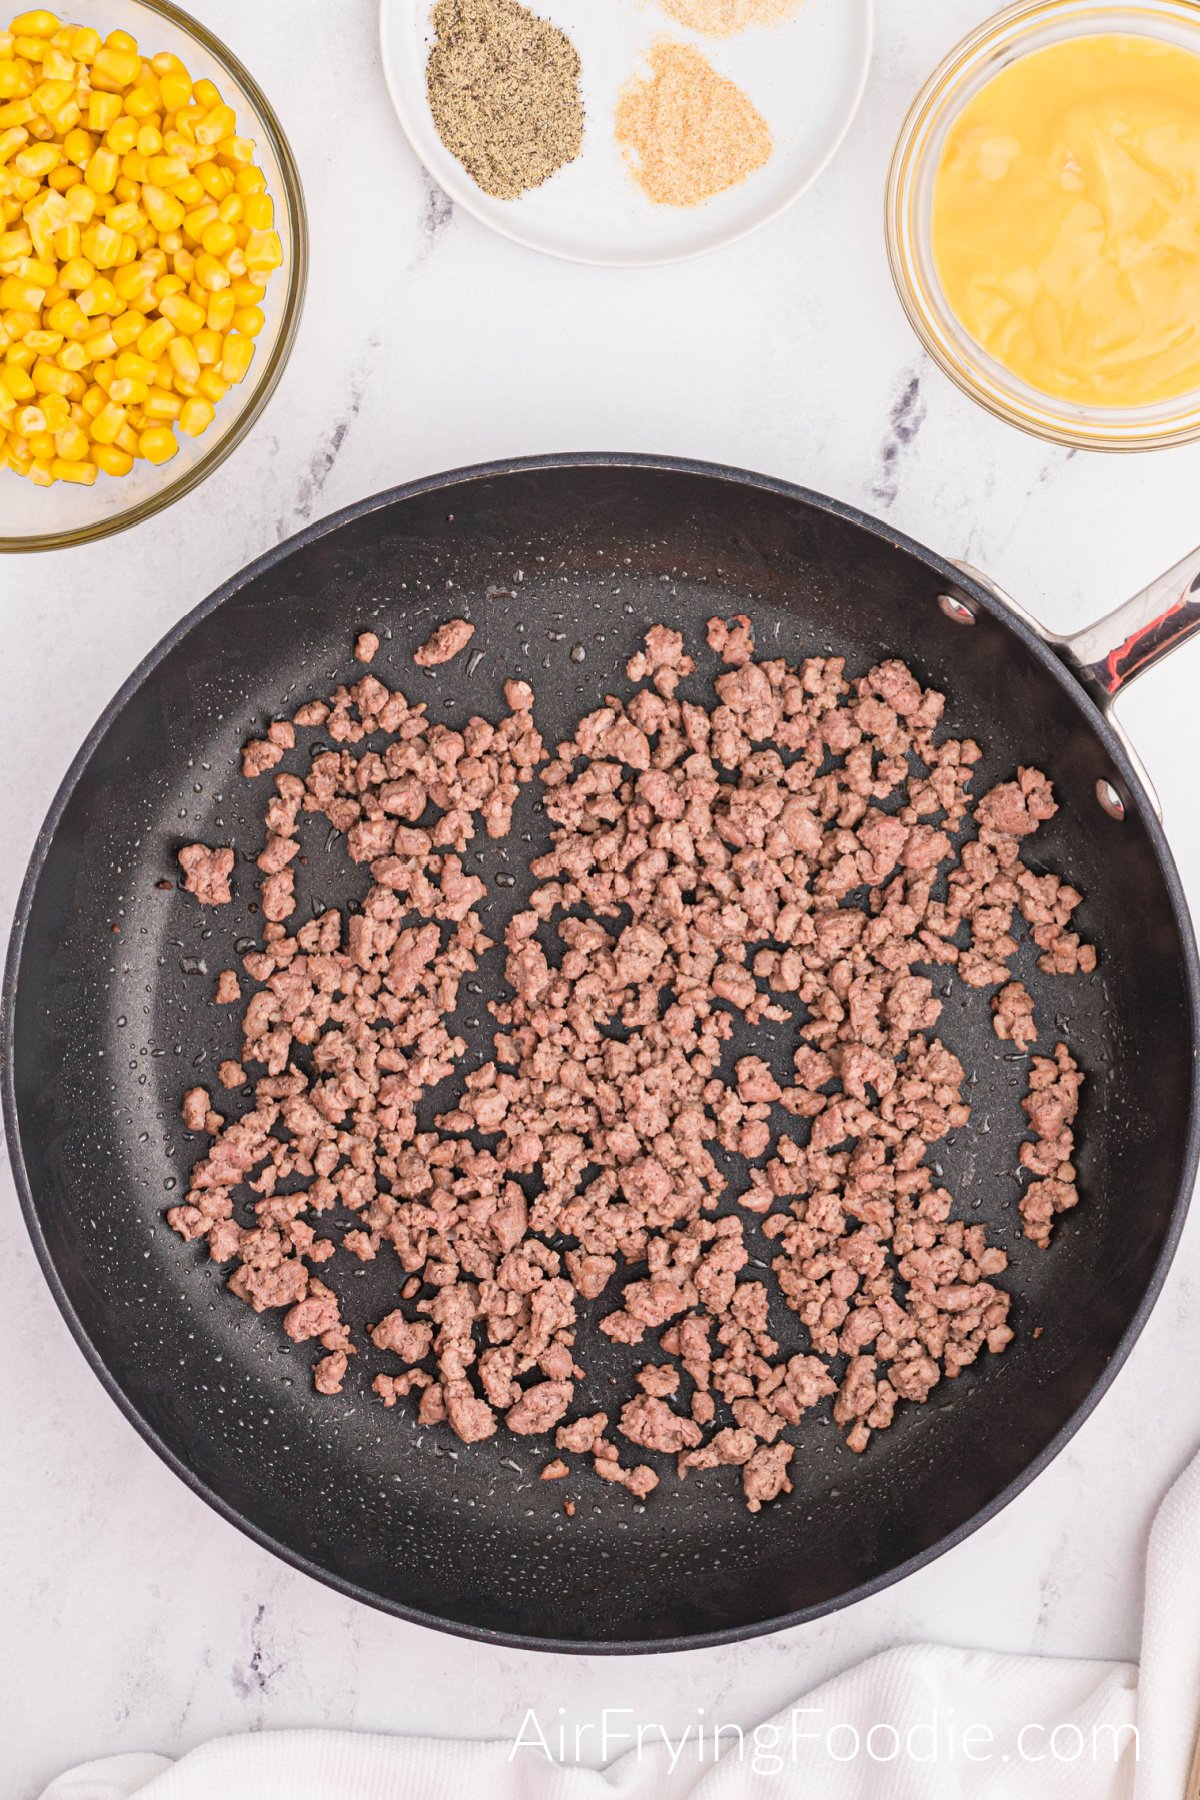 Ground beef cooked in a skillet with two clear bowls, one with corn and the second bowl with cream of soup, and the round plate showing the spices.